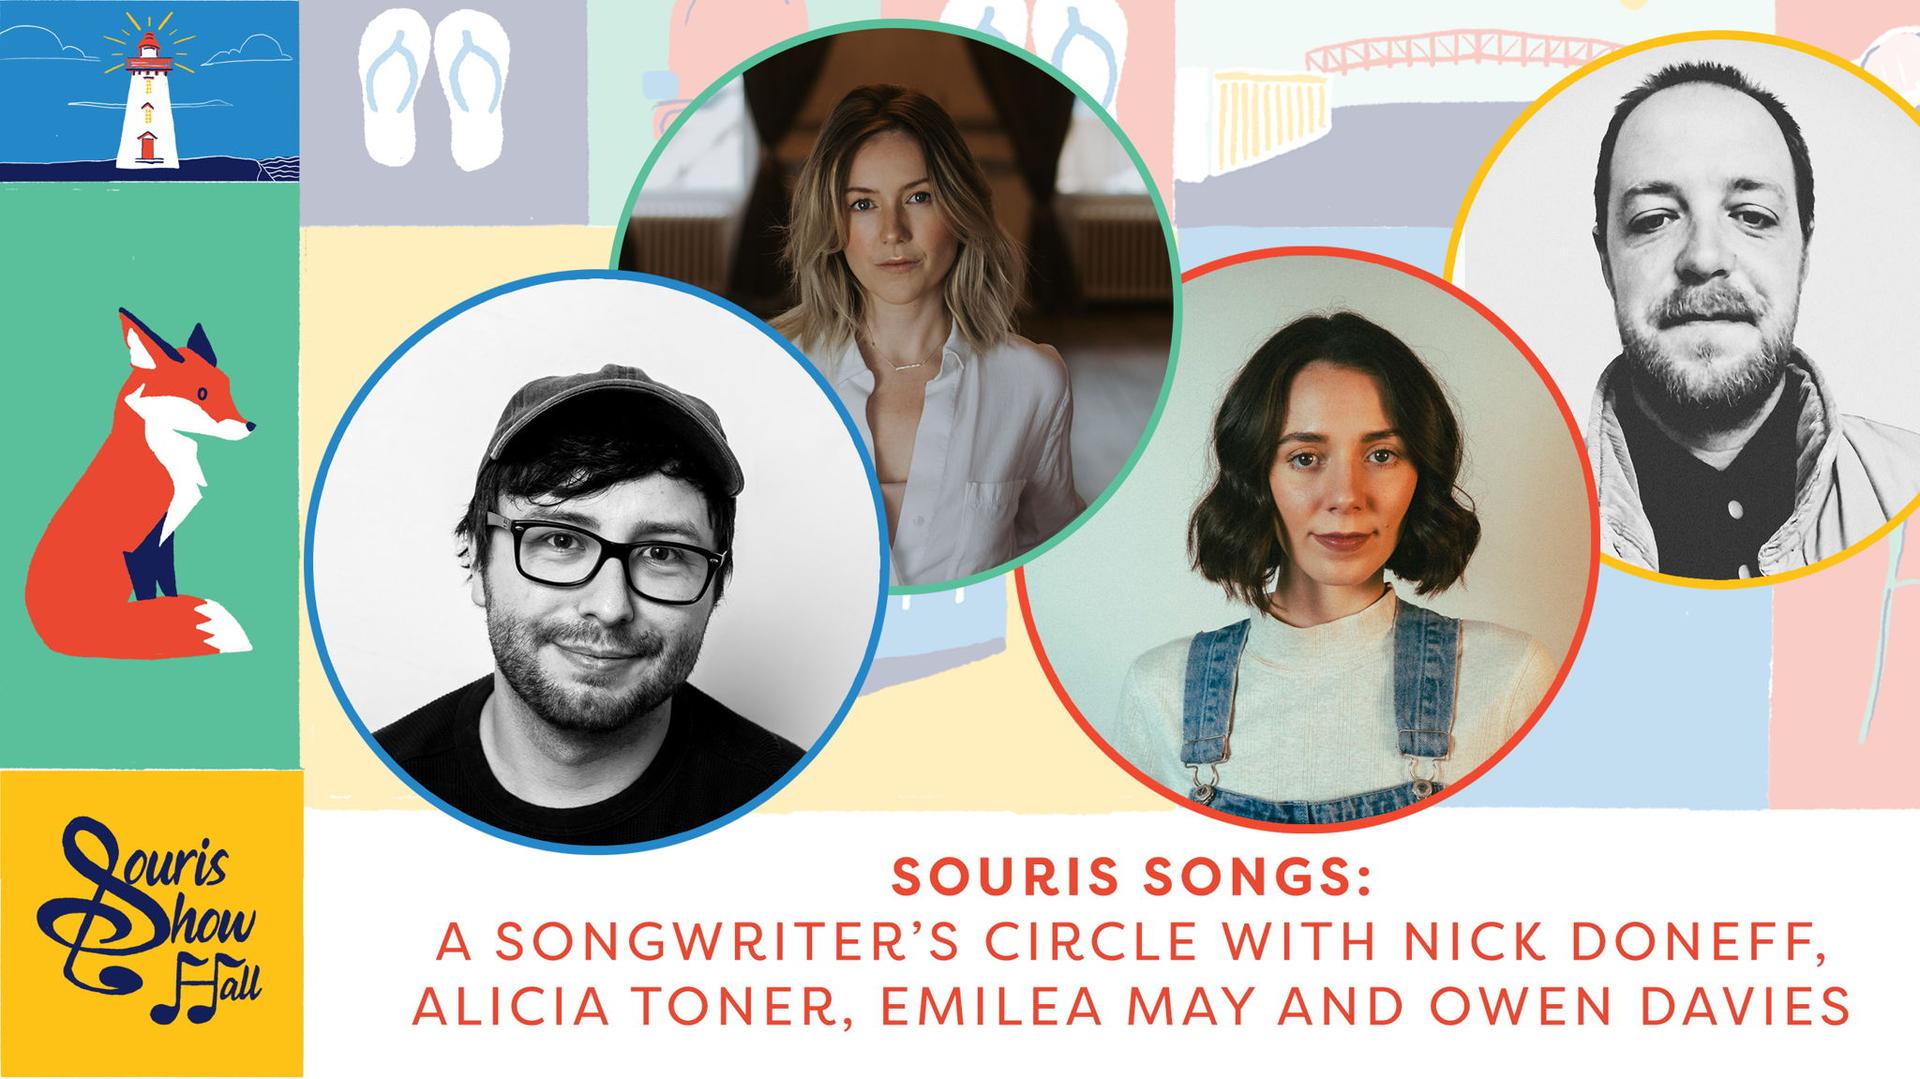 Songwriter's Circle with Nick Doneff, Alicia Toner, Emilea May, and Owen Davies